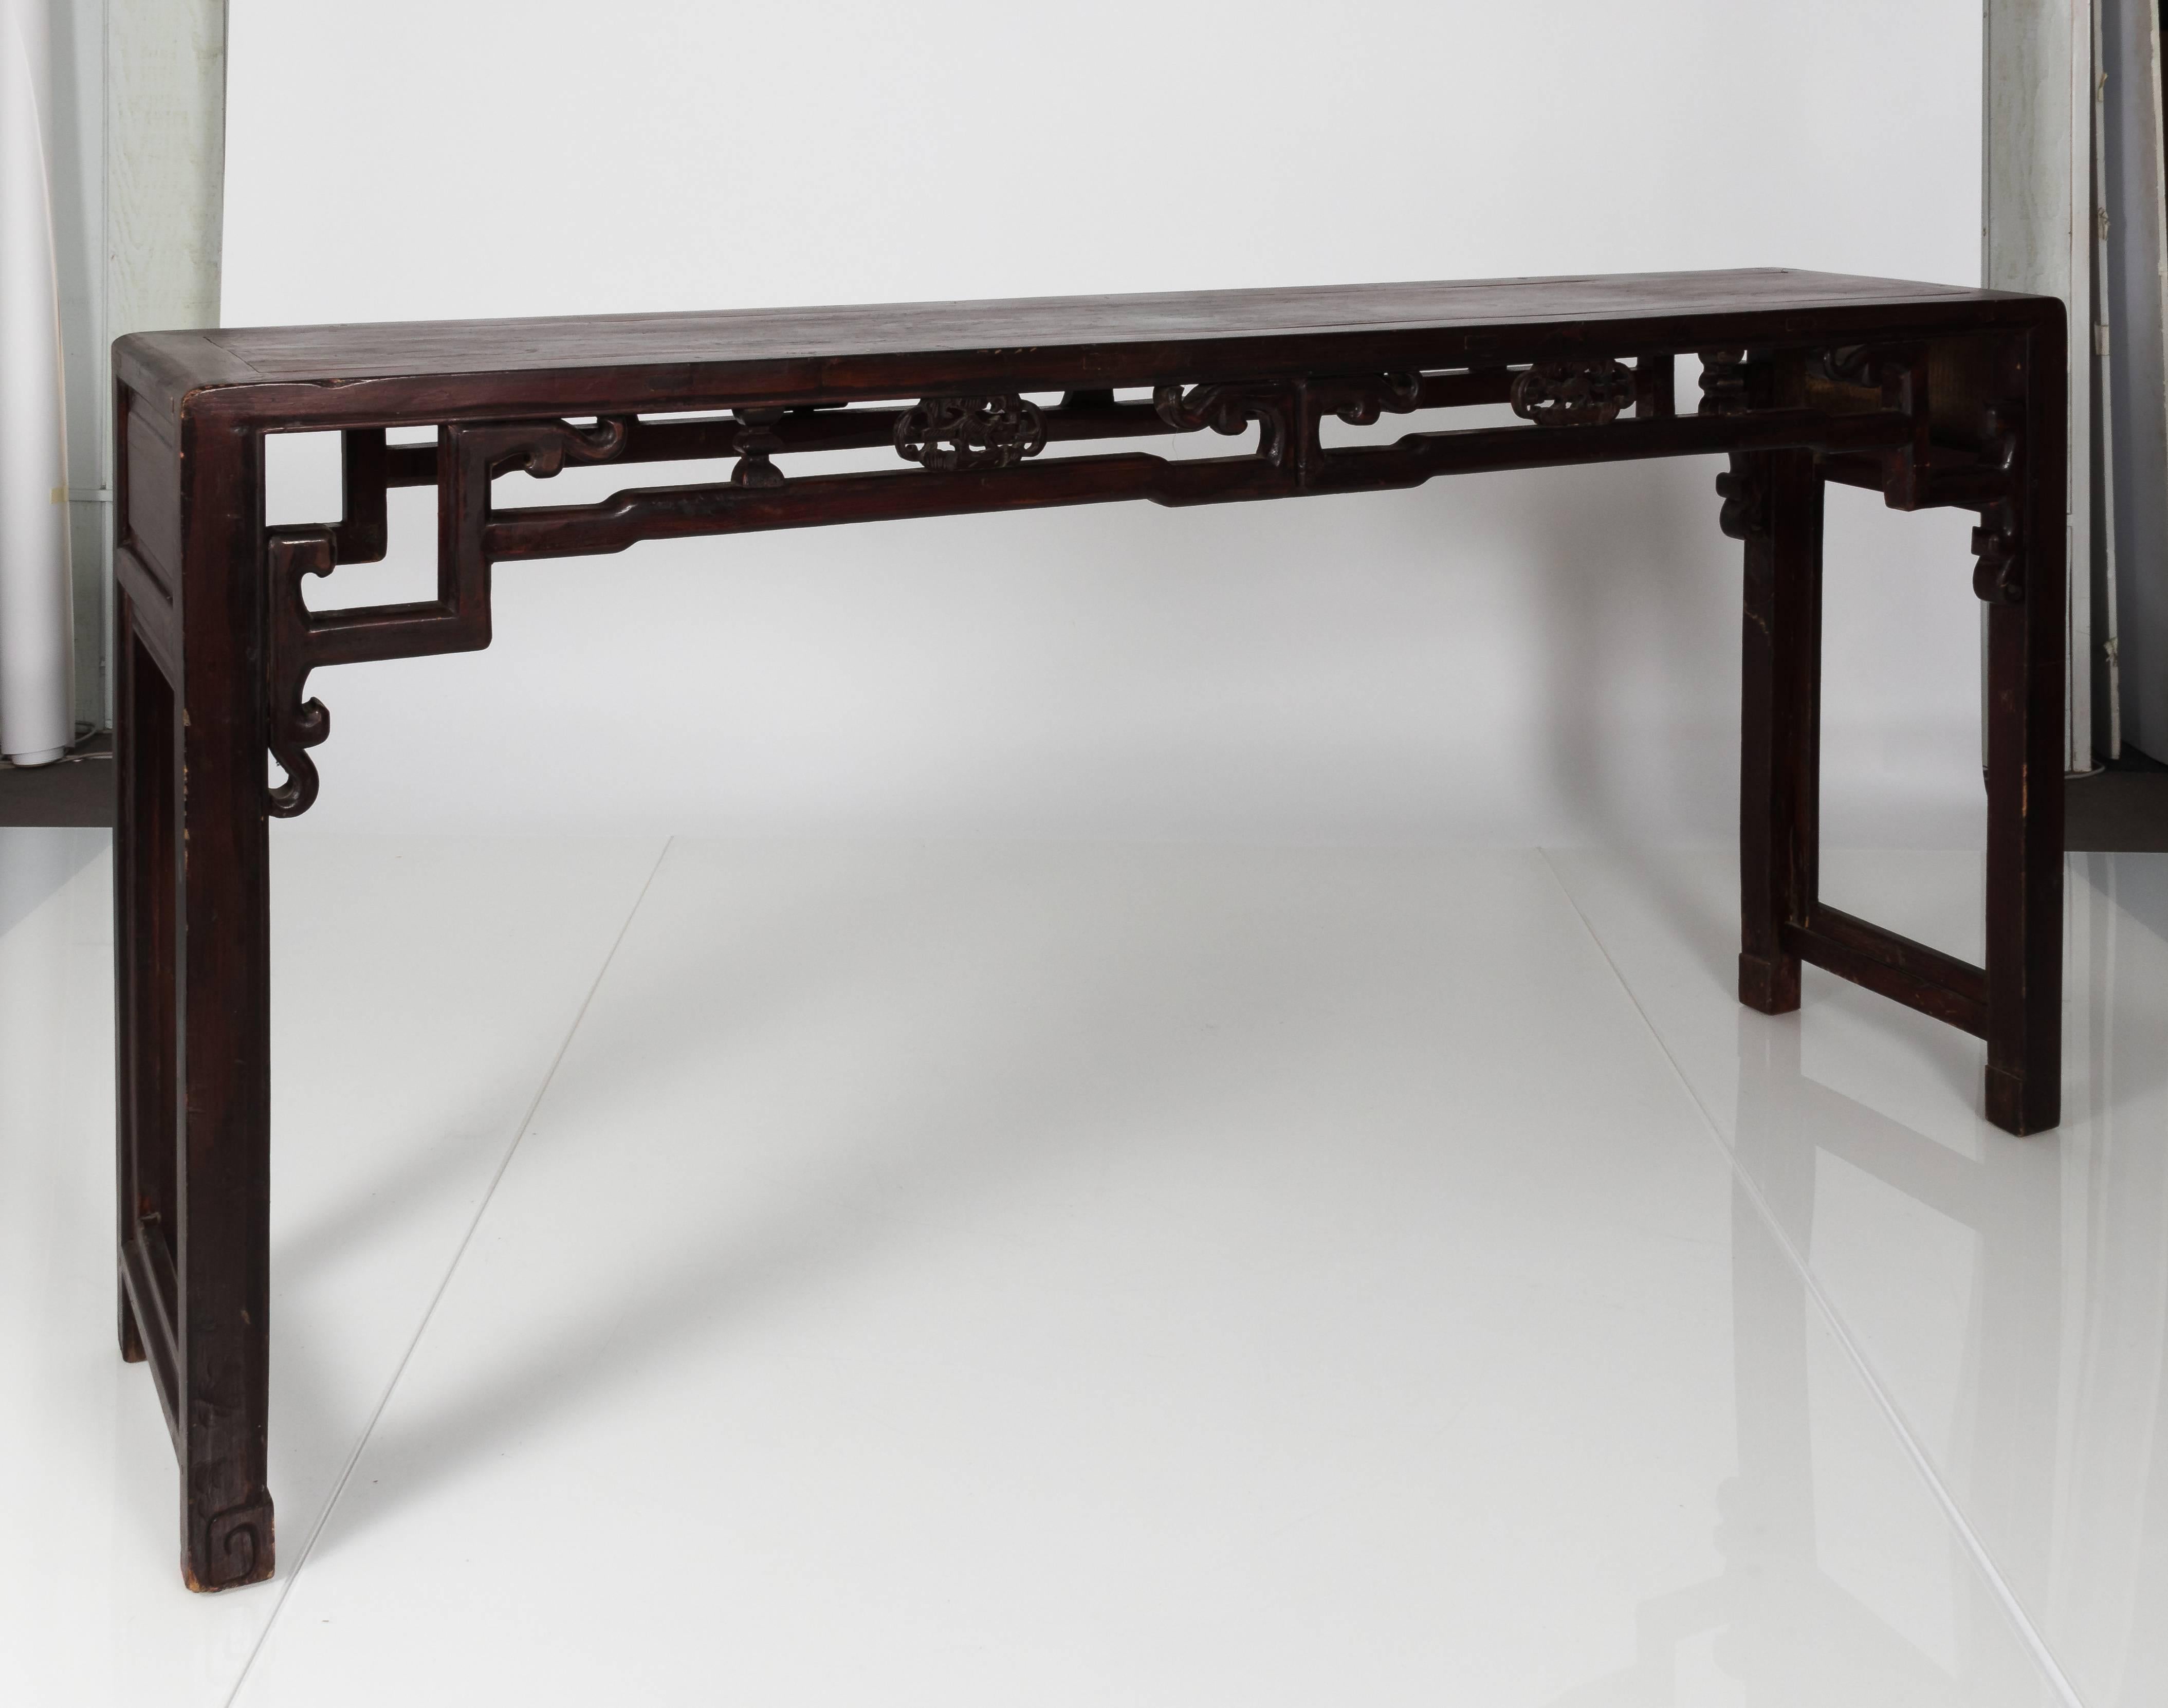 Mahogany Chinese alter table with carved and pierced skirt.
